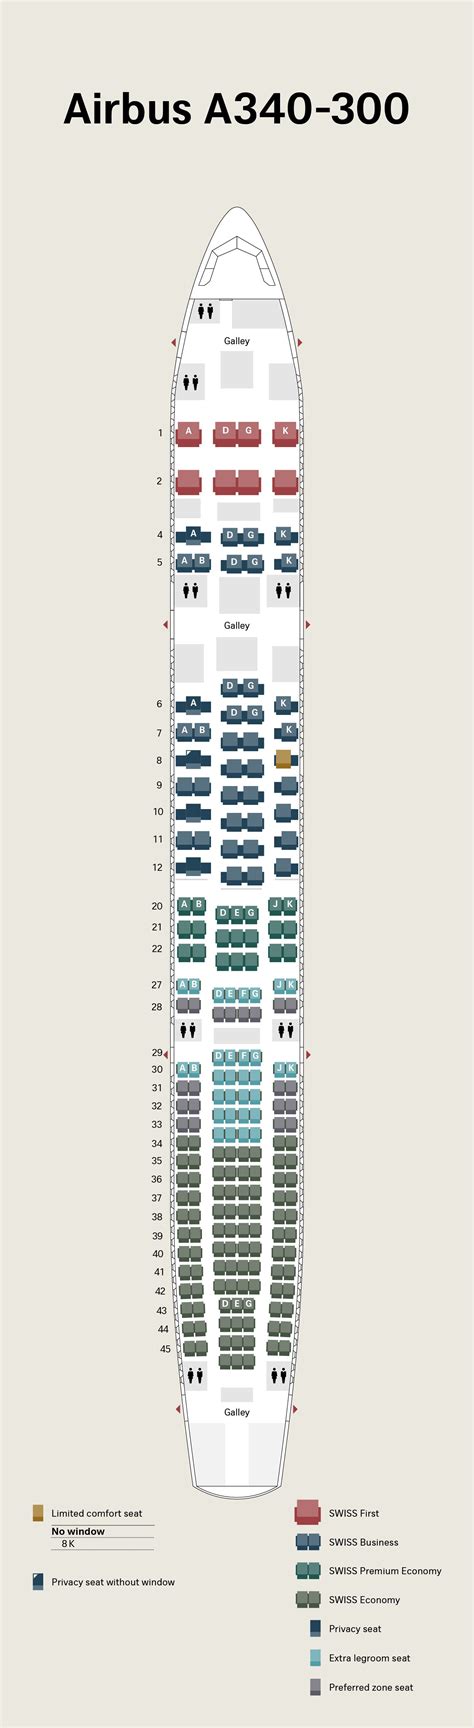 Lufthansa Seating Chart A340 300 Elcho Table